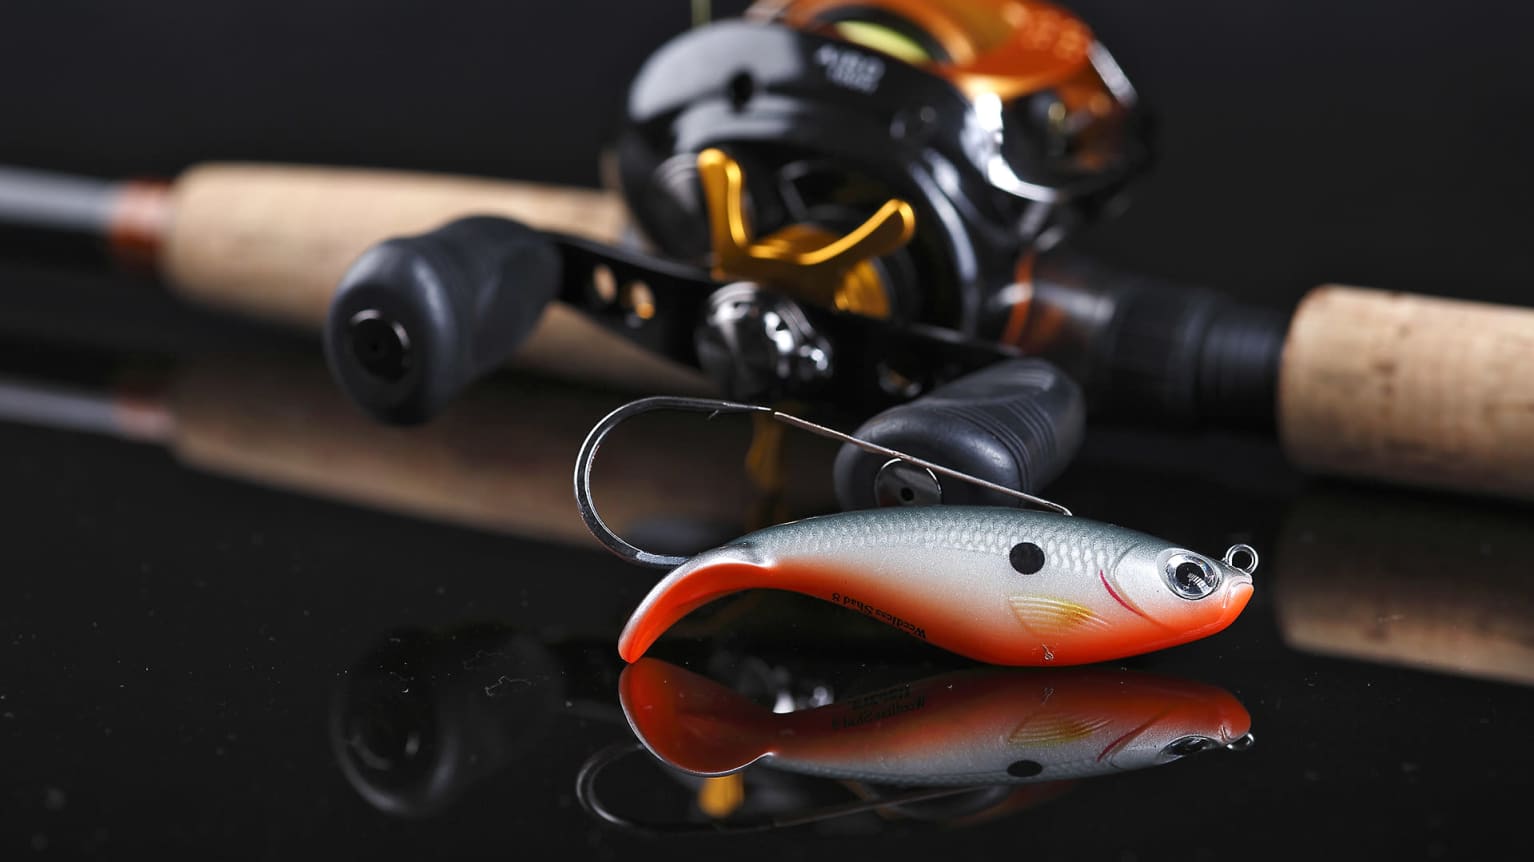 Rapala halts fishing gear production in Finland after more than 80 years, Yle News